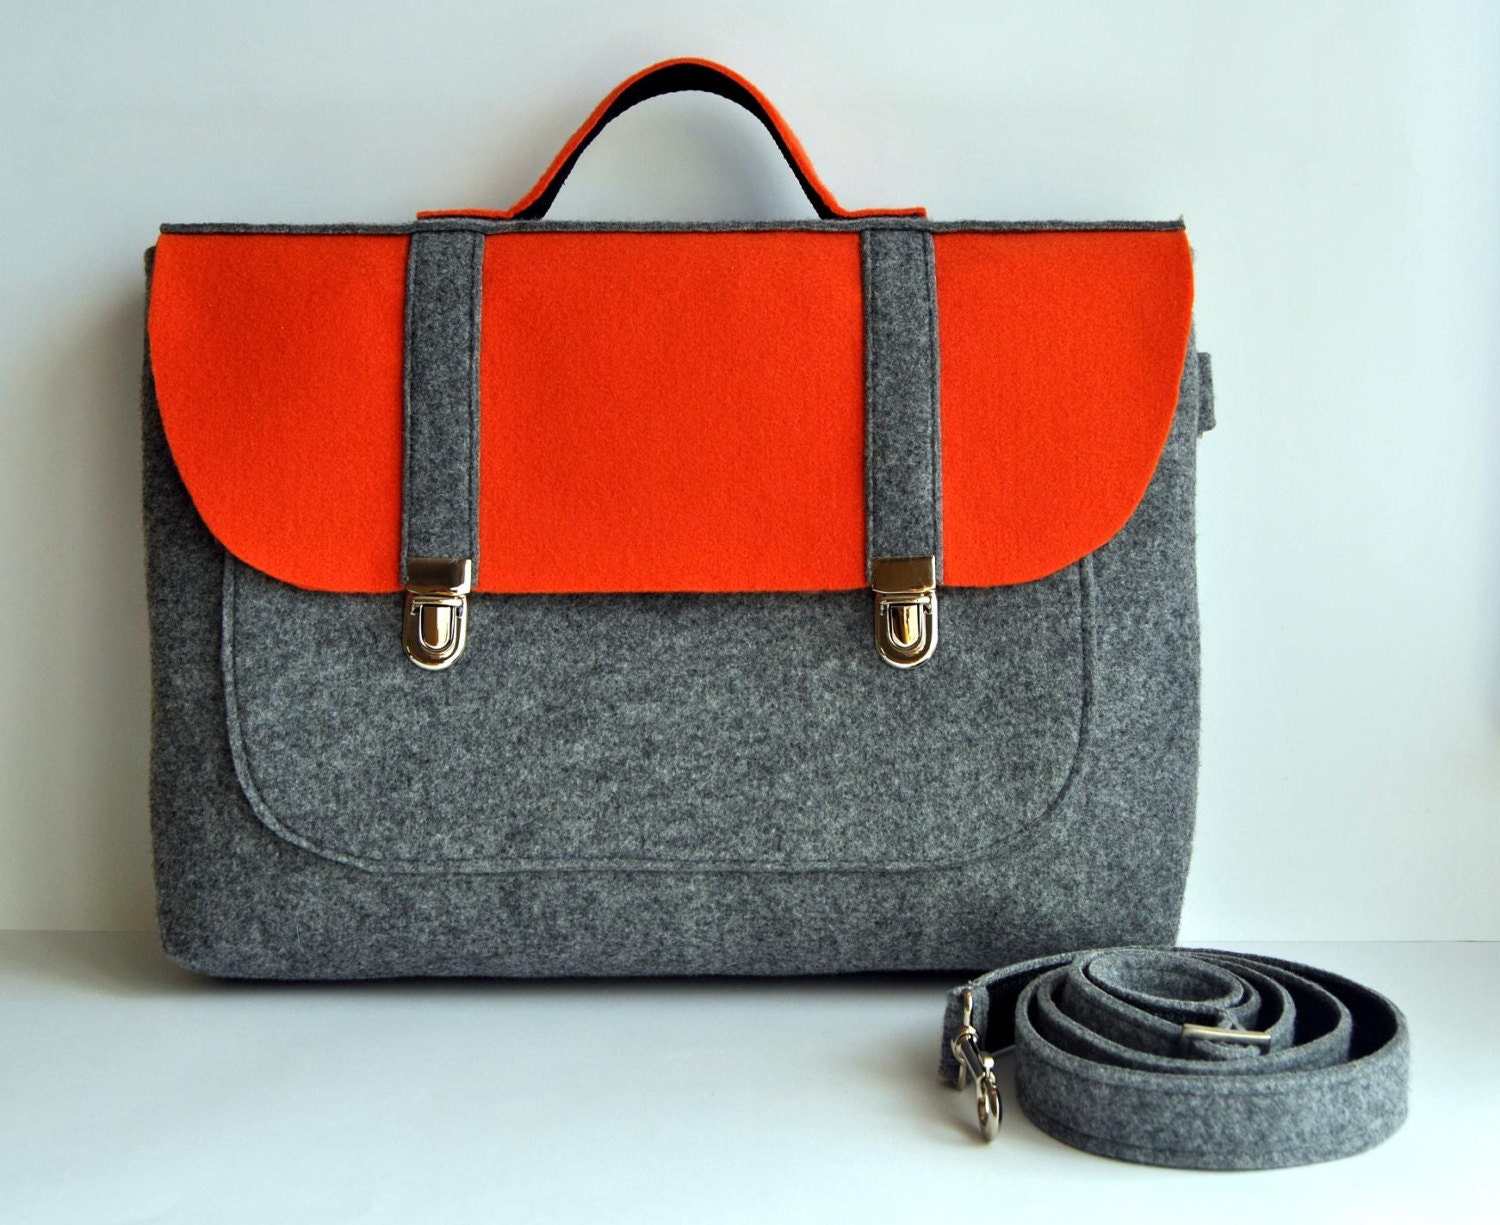 SALE 10% off 16 inch laptop bag with a pocket gray by kmBaggies